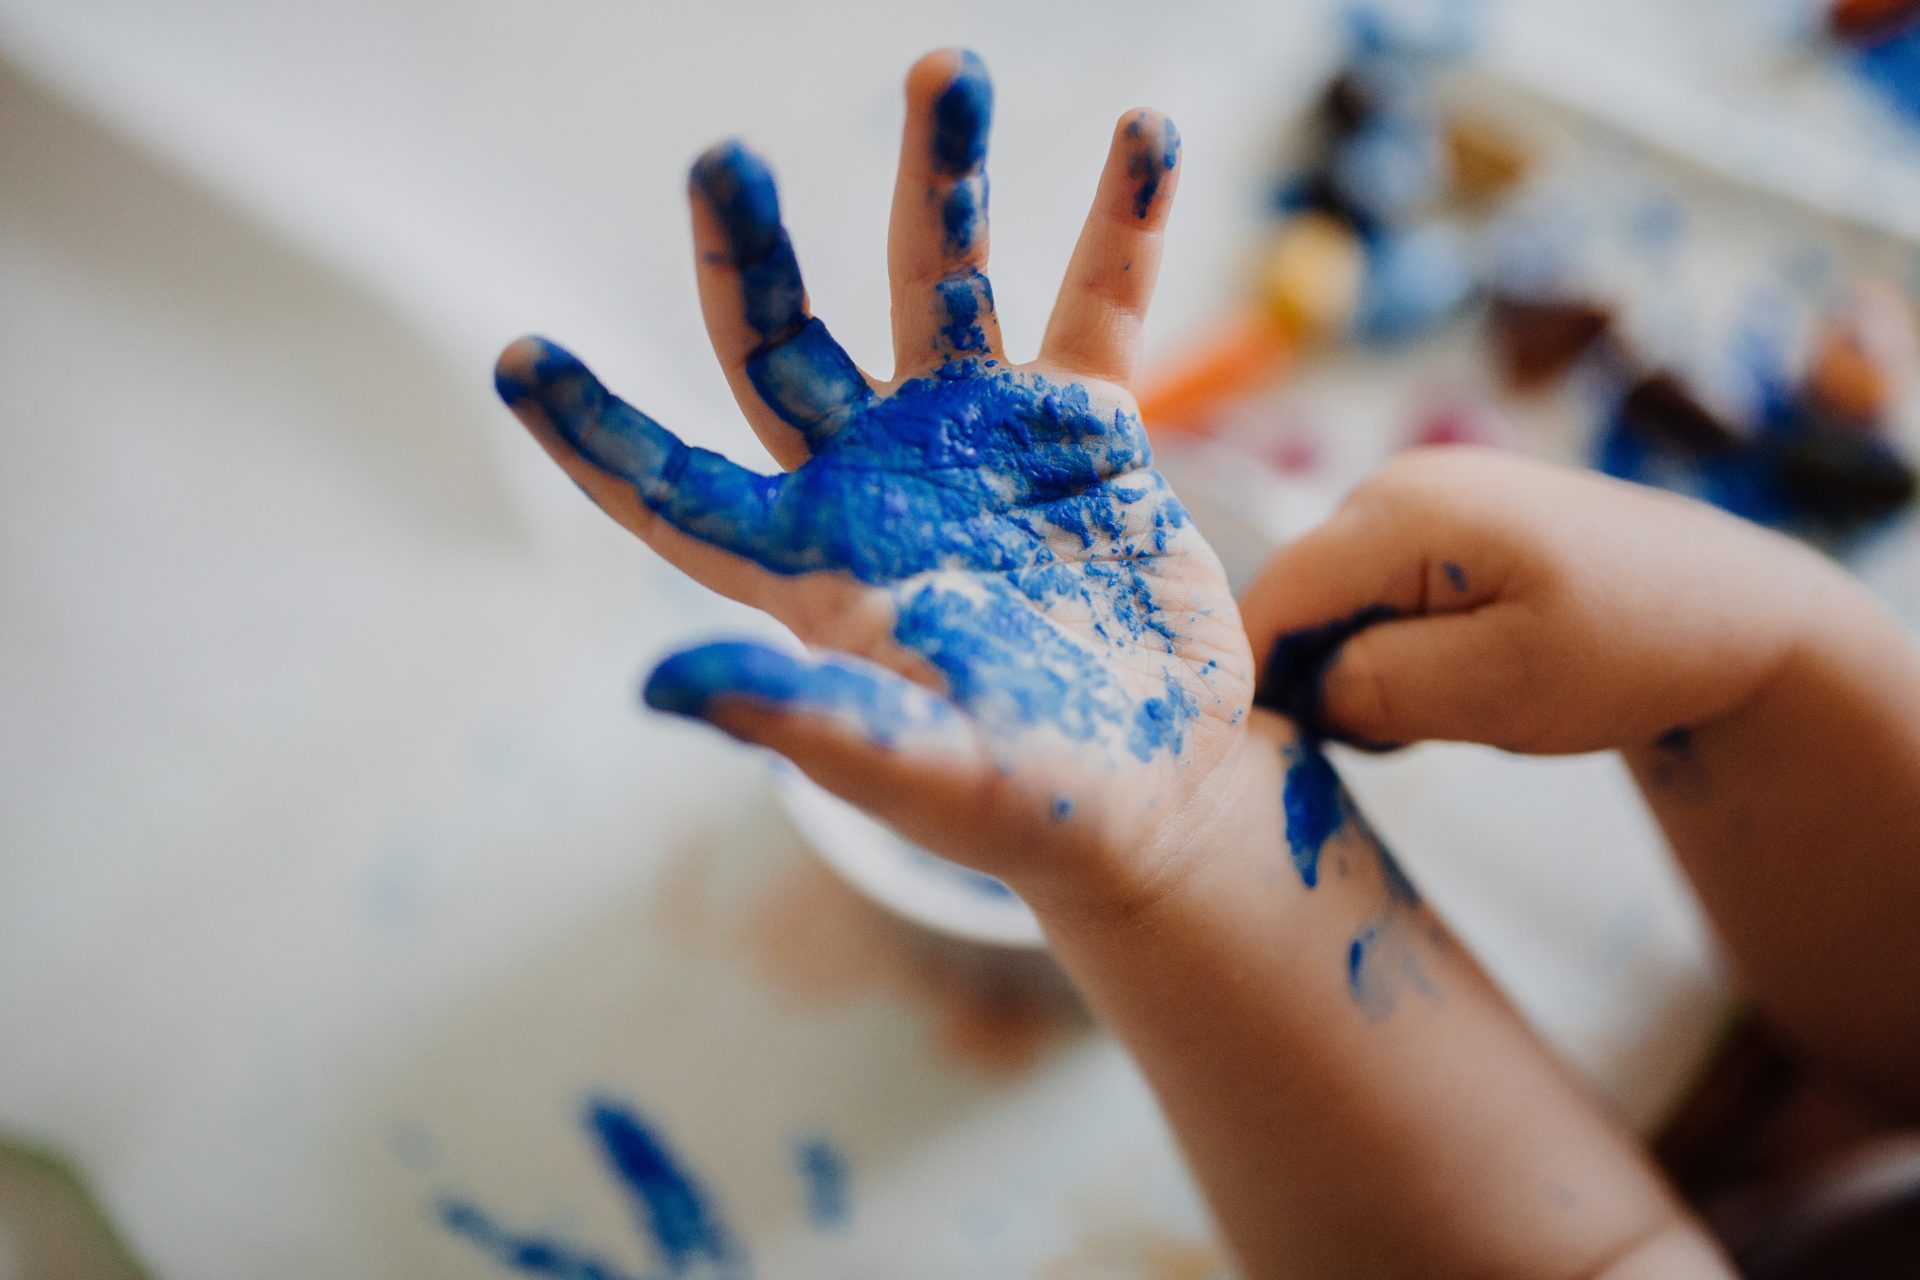 Child's hand with blue paint